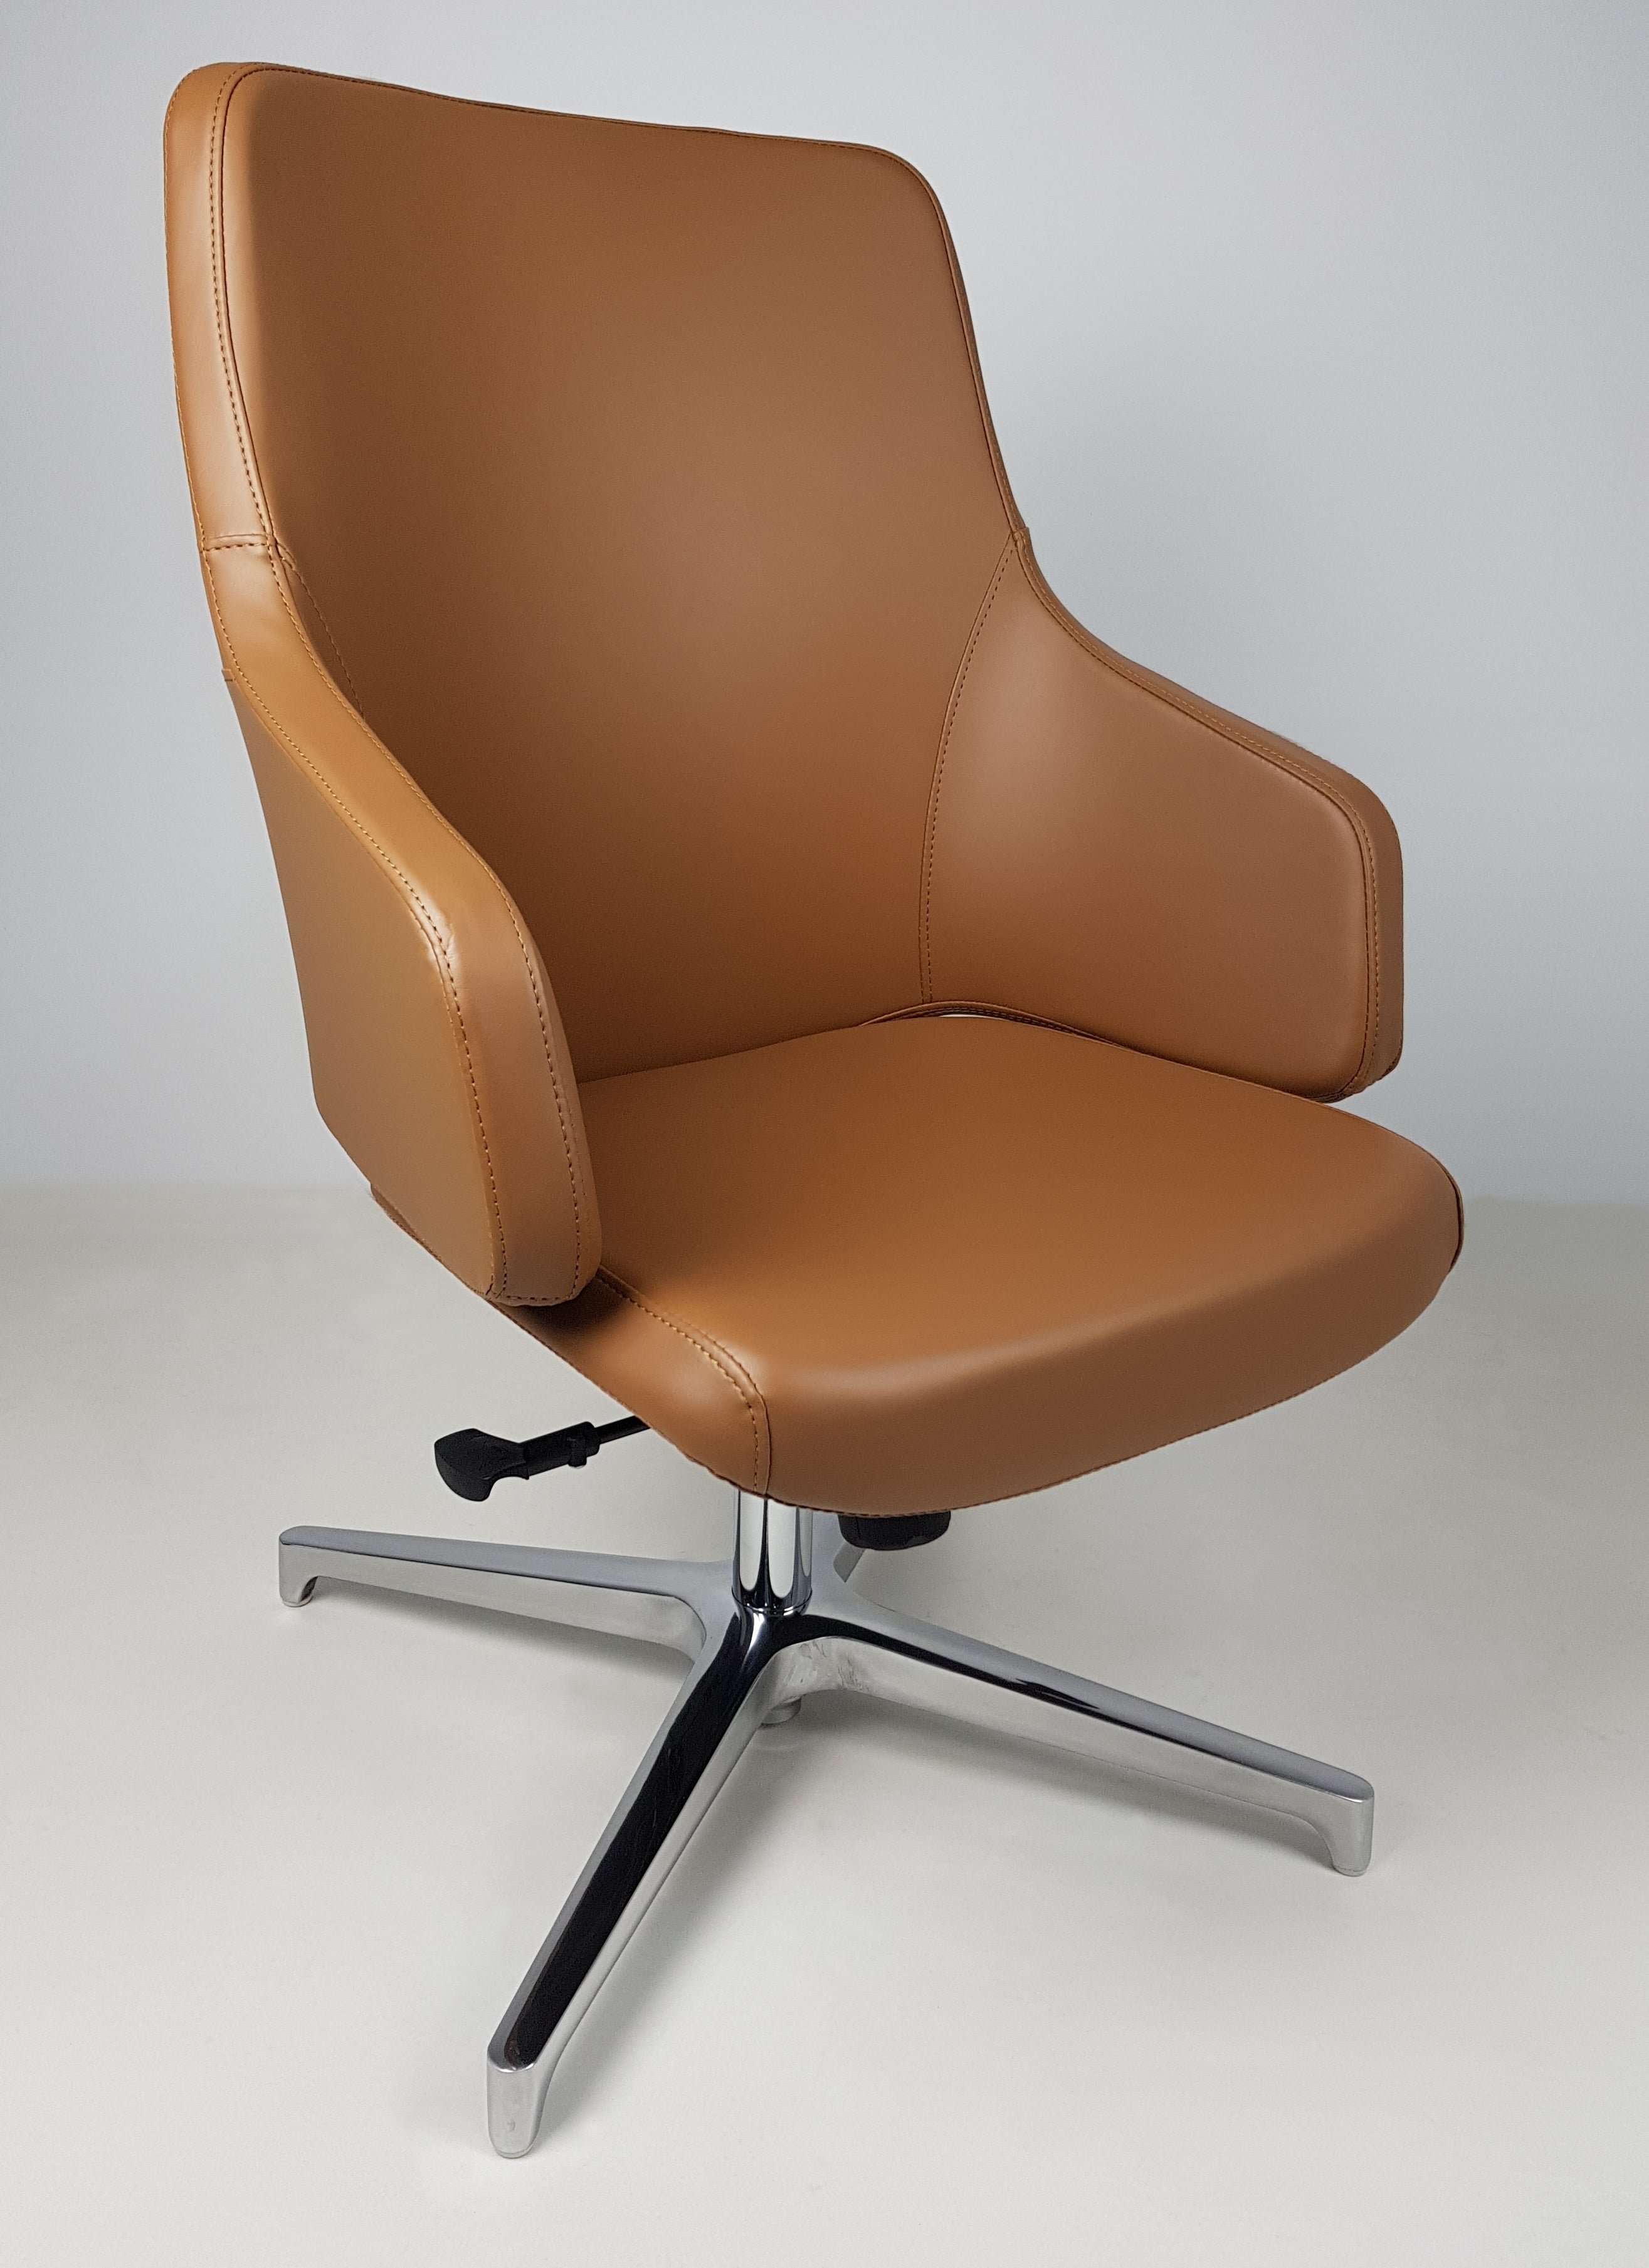 Tan Leather Visitor Office Chair with Seat Slide - CHA-1823C UK